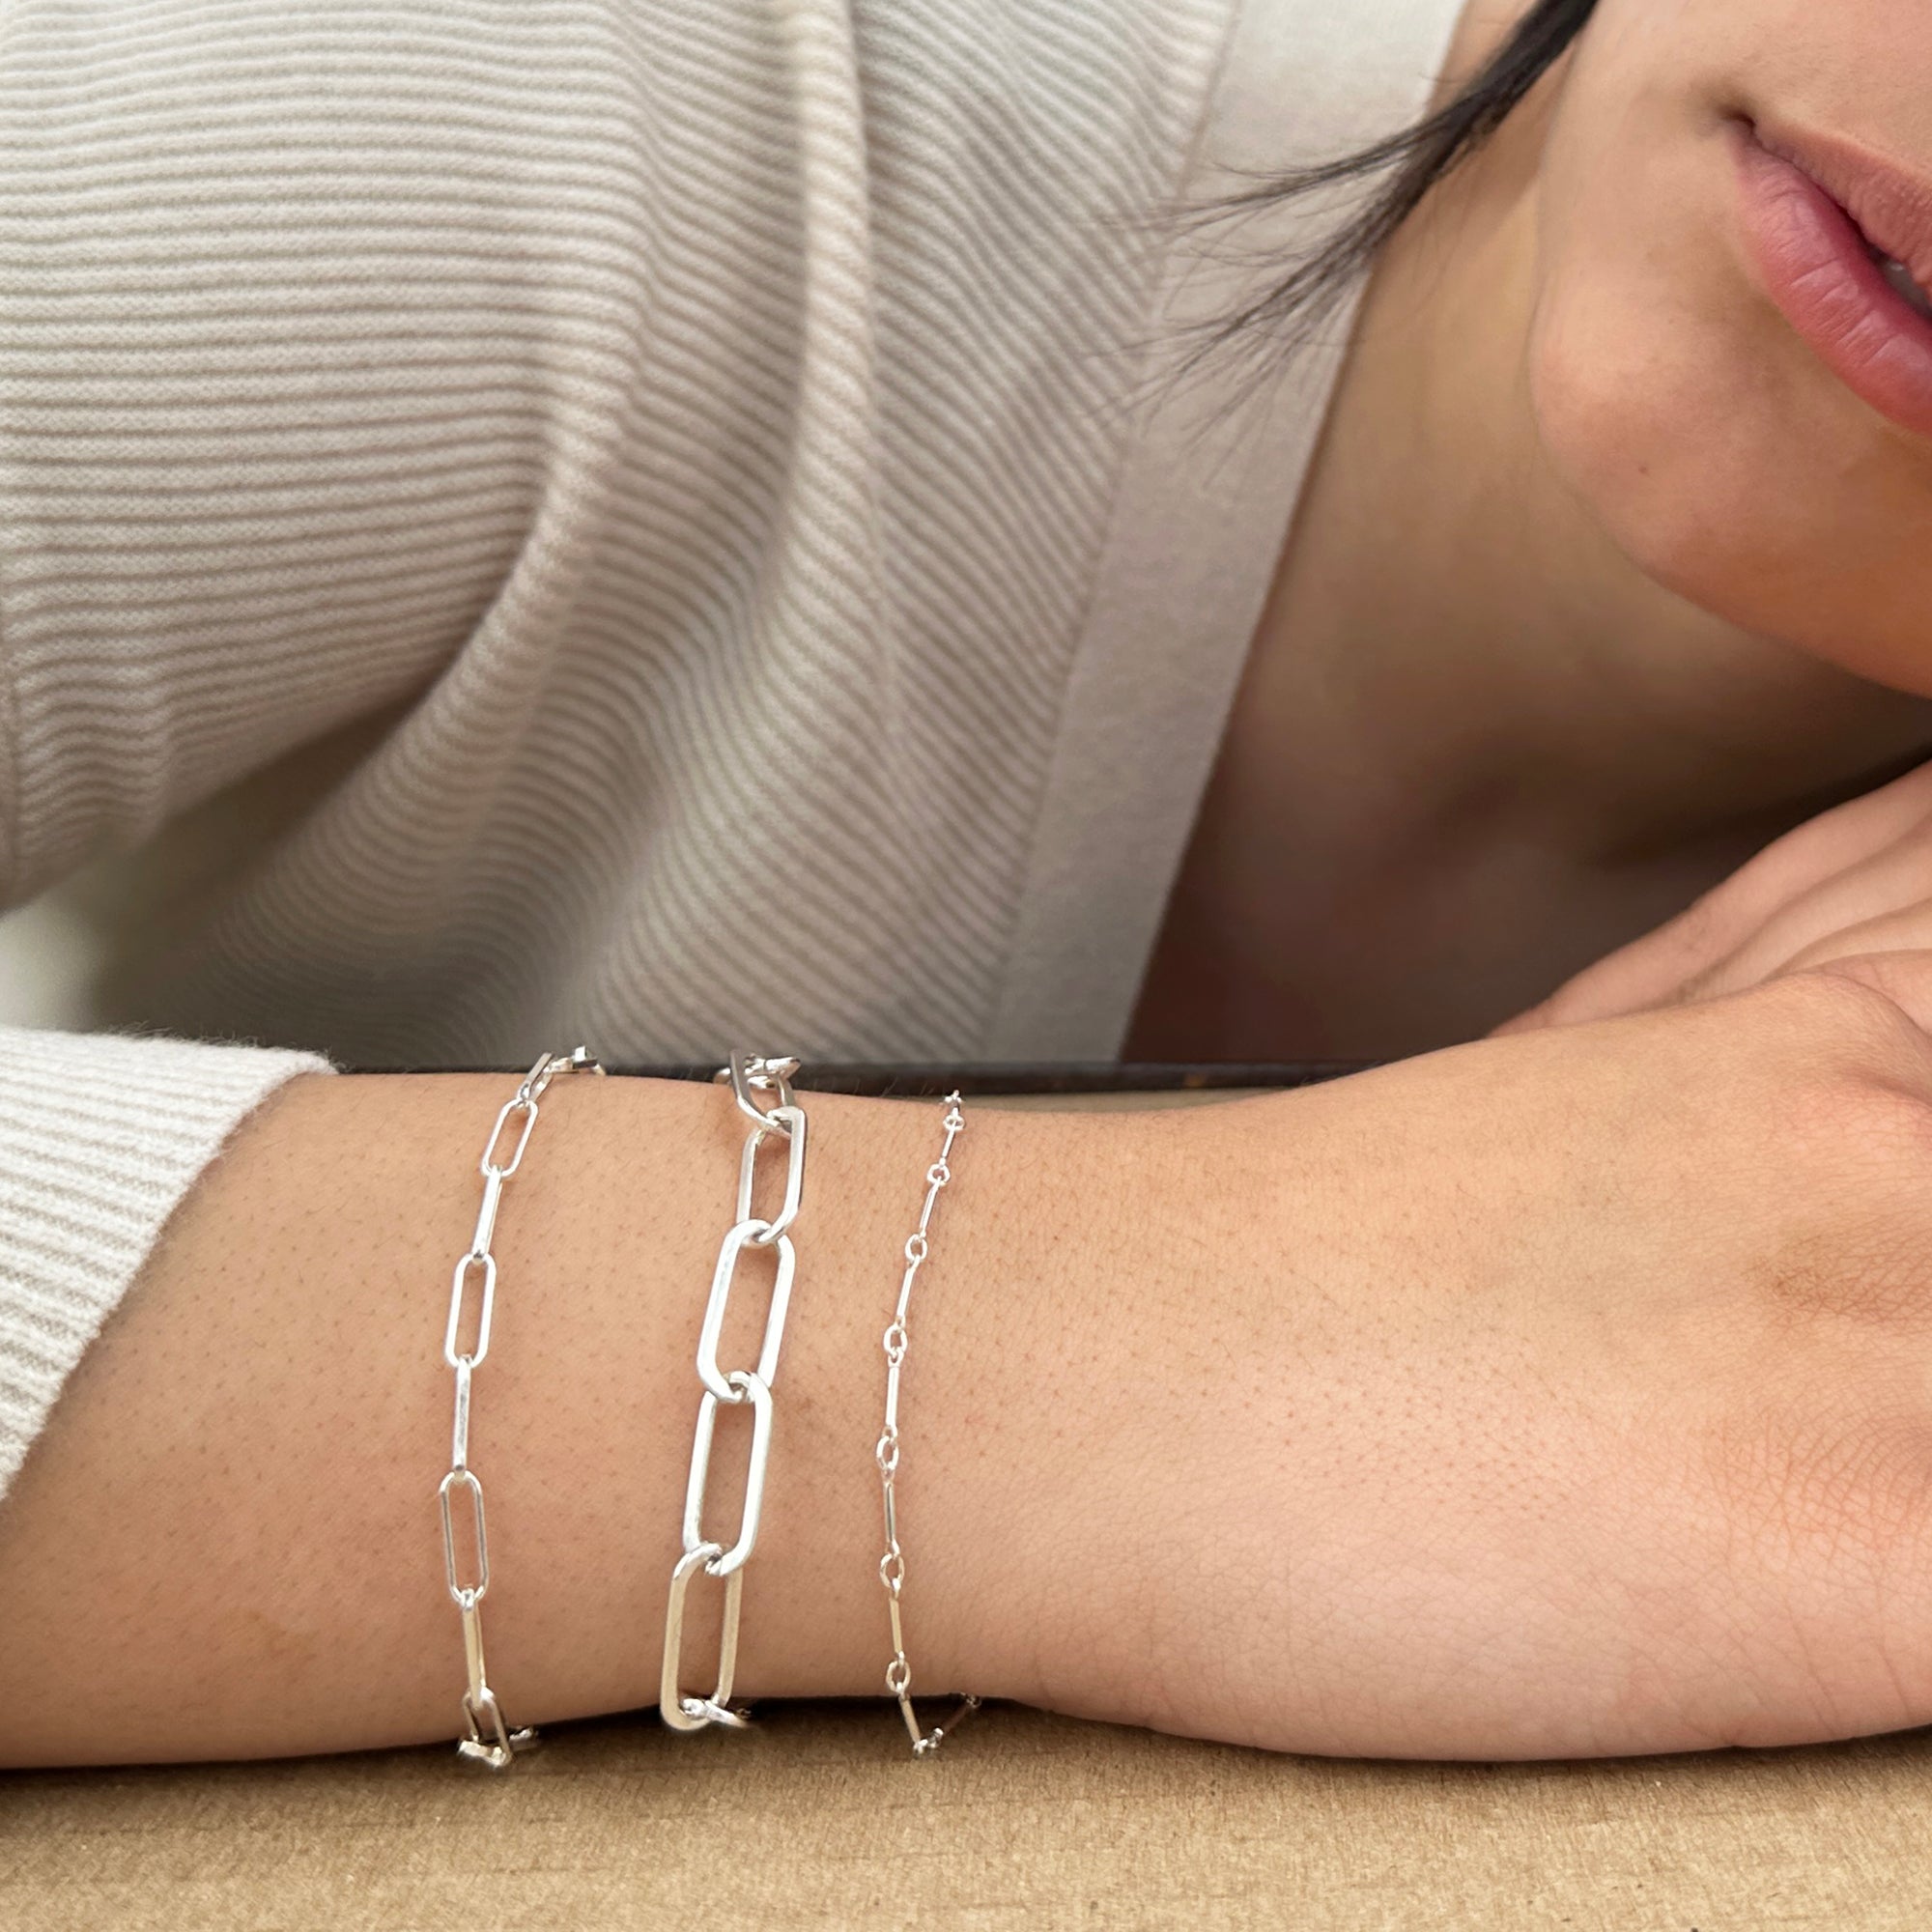 Women wearing a bracelet stack three sterling silver chains